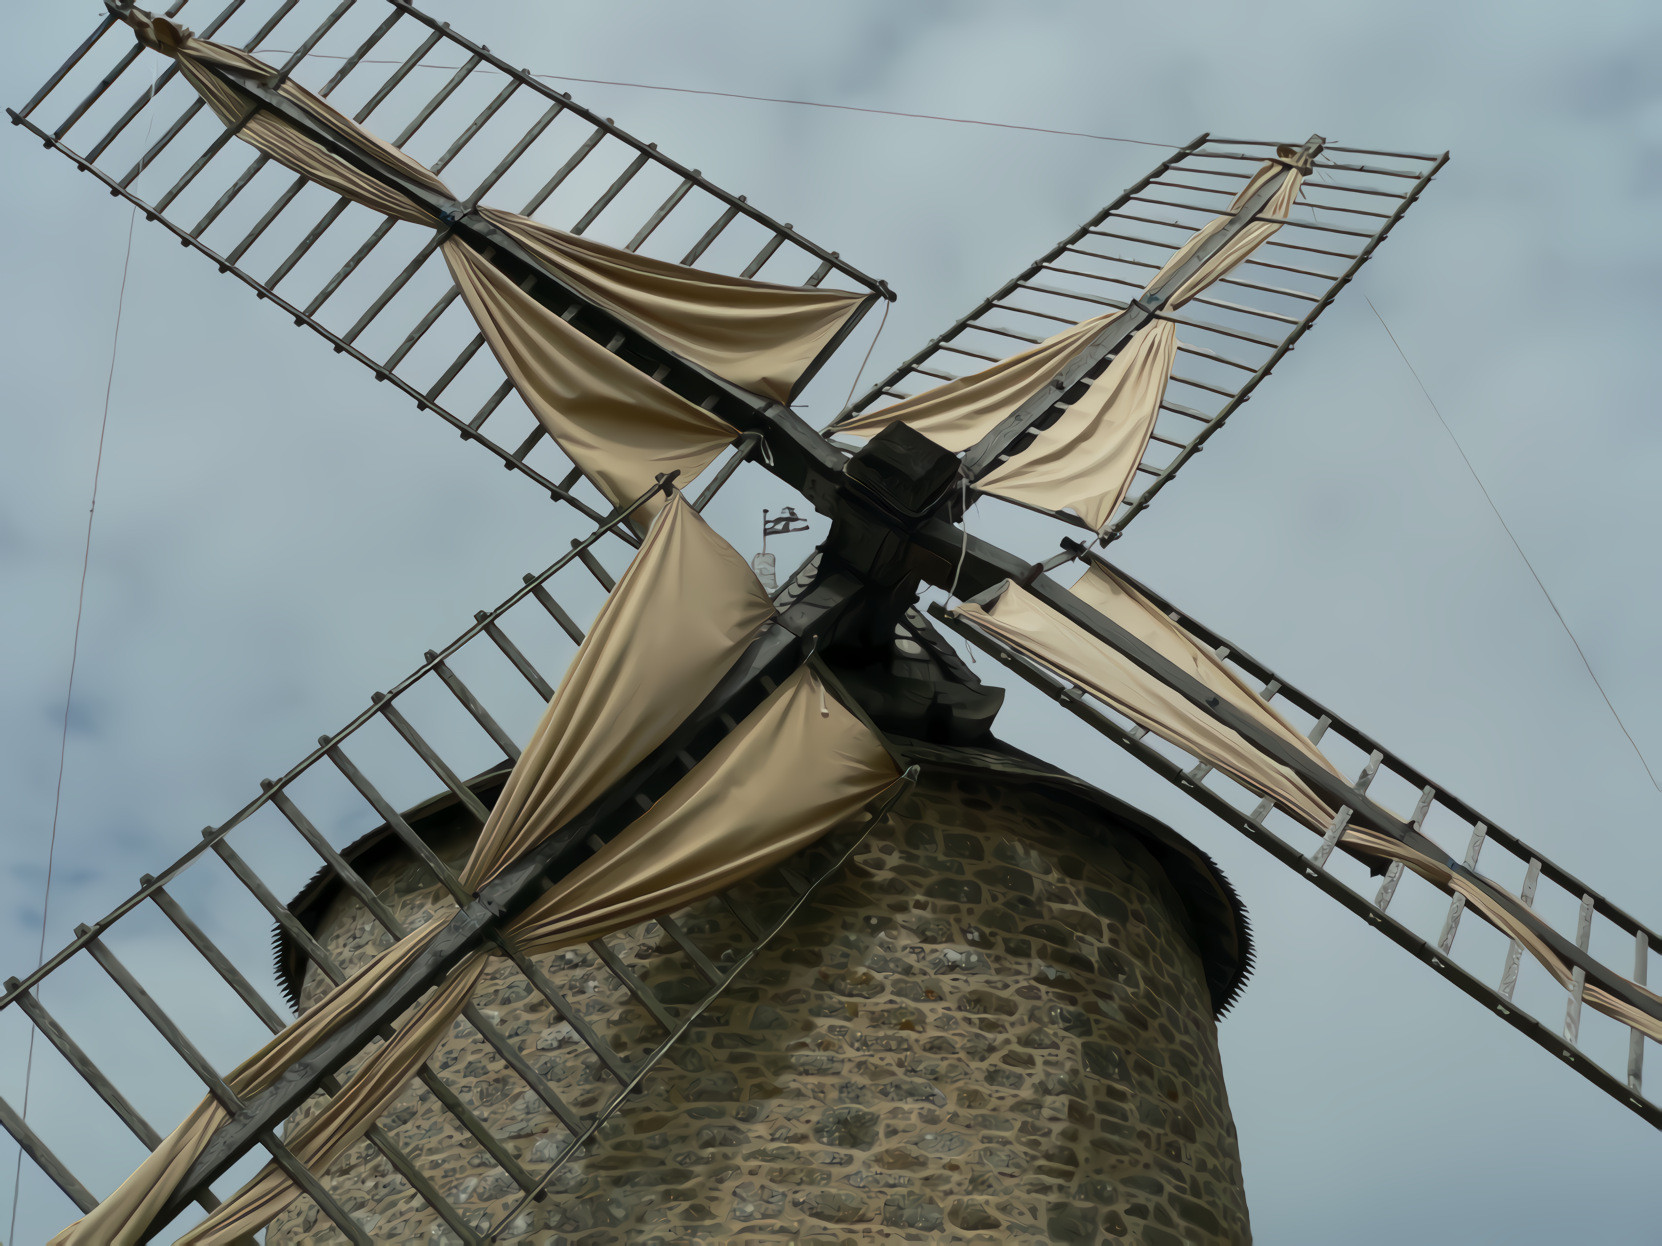 Old French Windmill